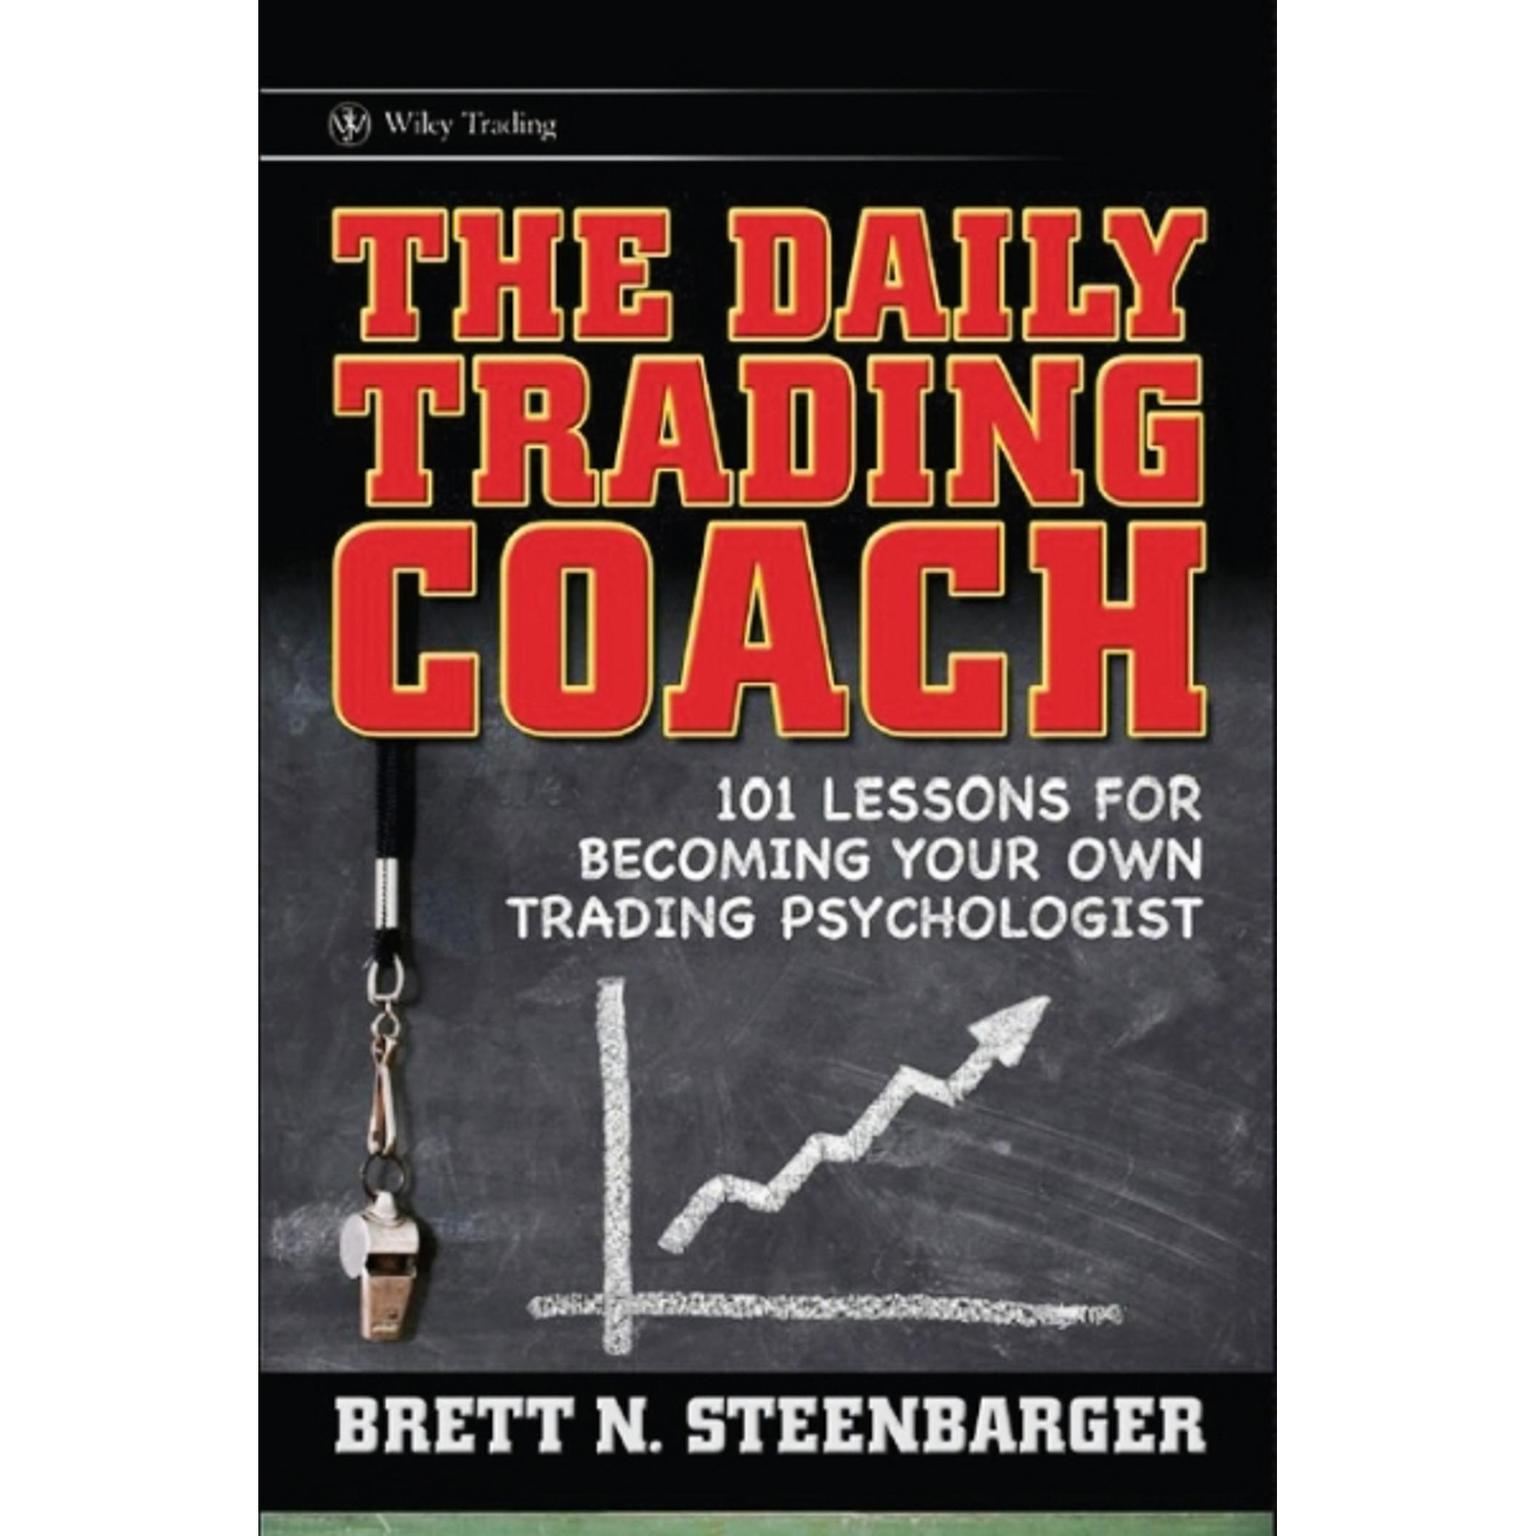 The Daily Trading Coach: 101 Lessons for Becoming Your Own Trading Psychologist Audiobook, by Brett N. Steenbarger